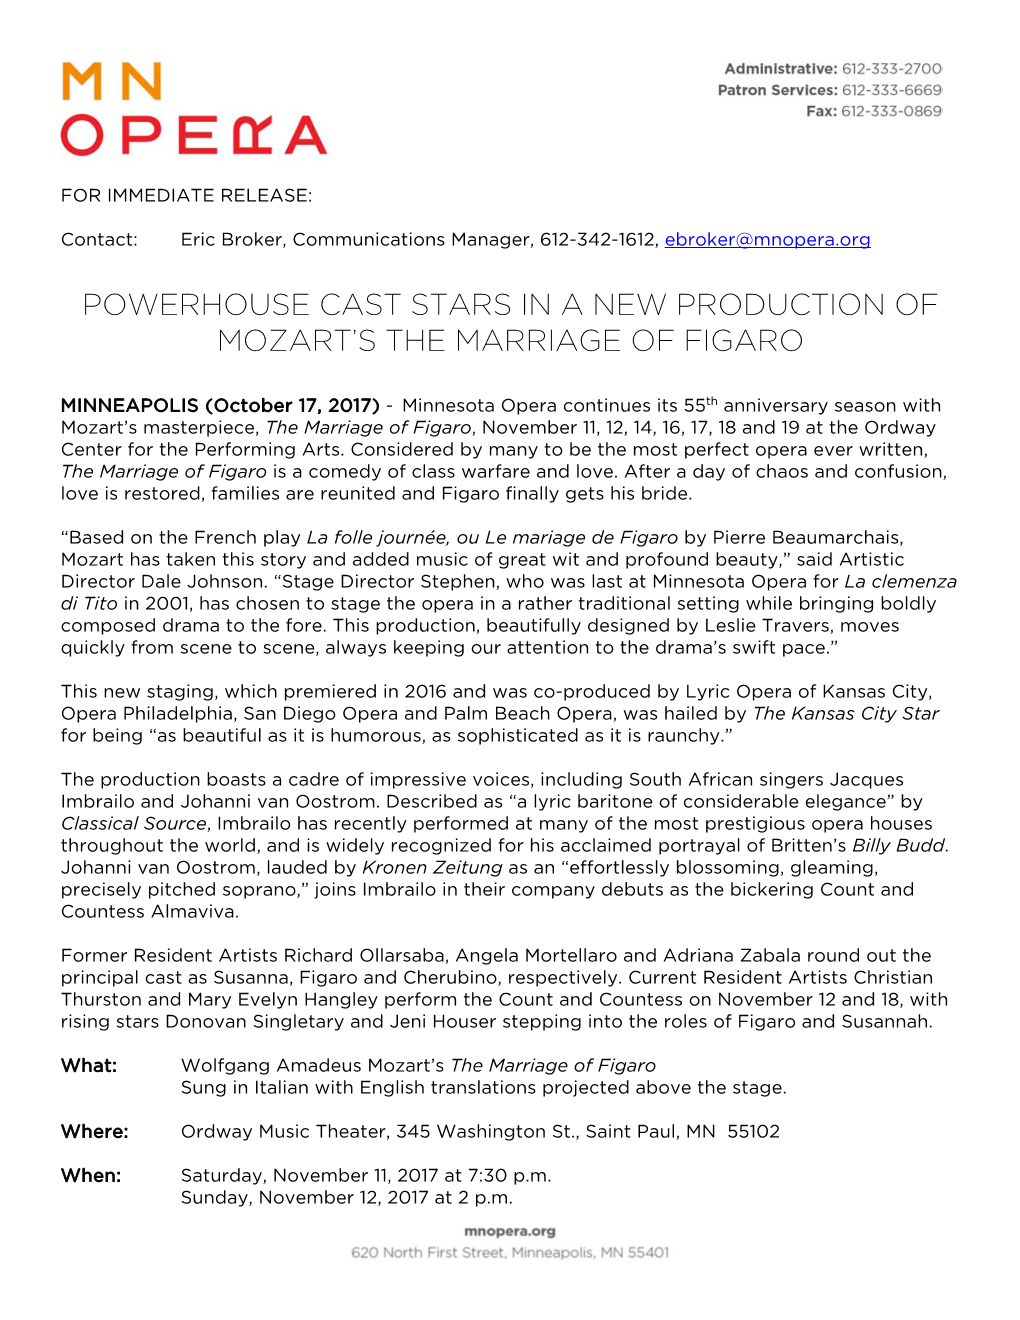 Powerhouse Cast Stars in a New Production of Mozart’S the Marriage of Figaro